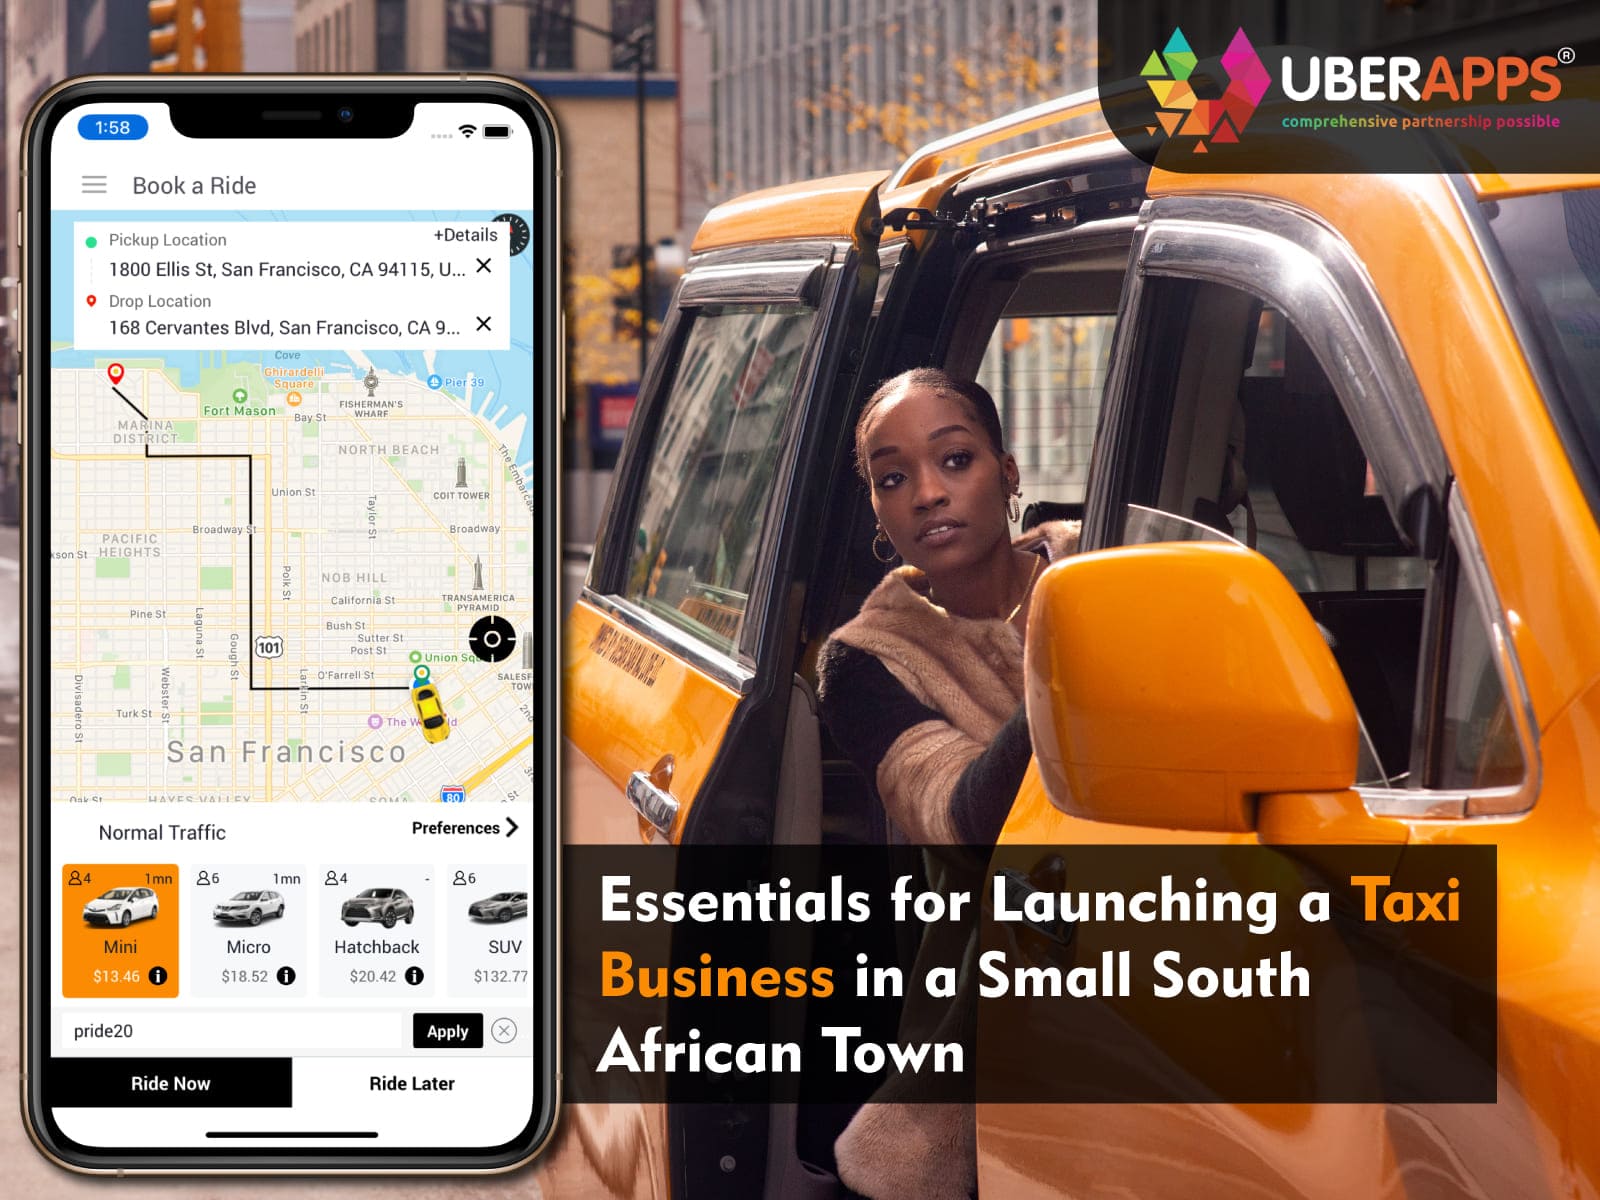 Essentials for Launching a Taxi Business in a Small South African Town